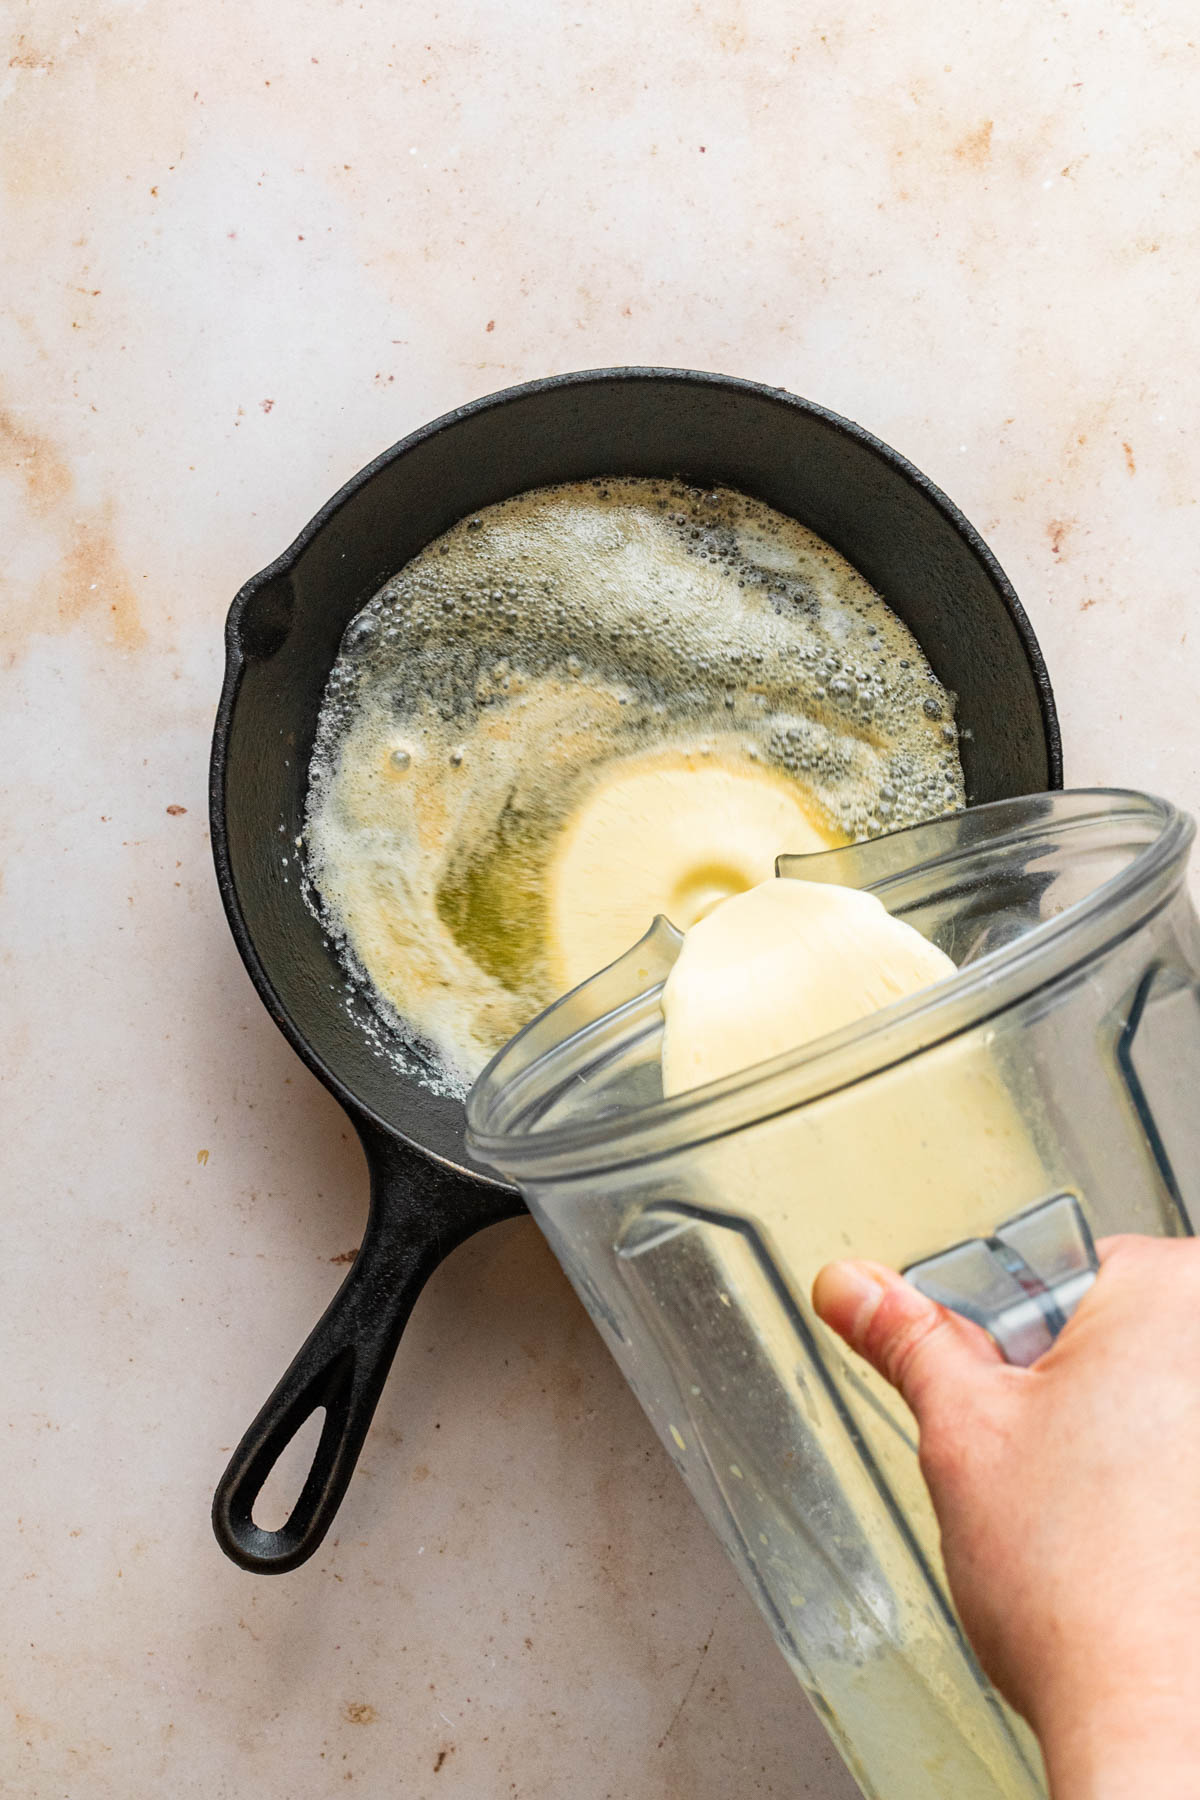 A hand pouring batter into a cast iron skillet from a blender jug.